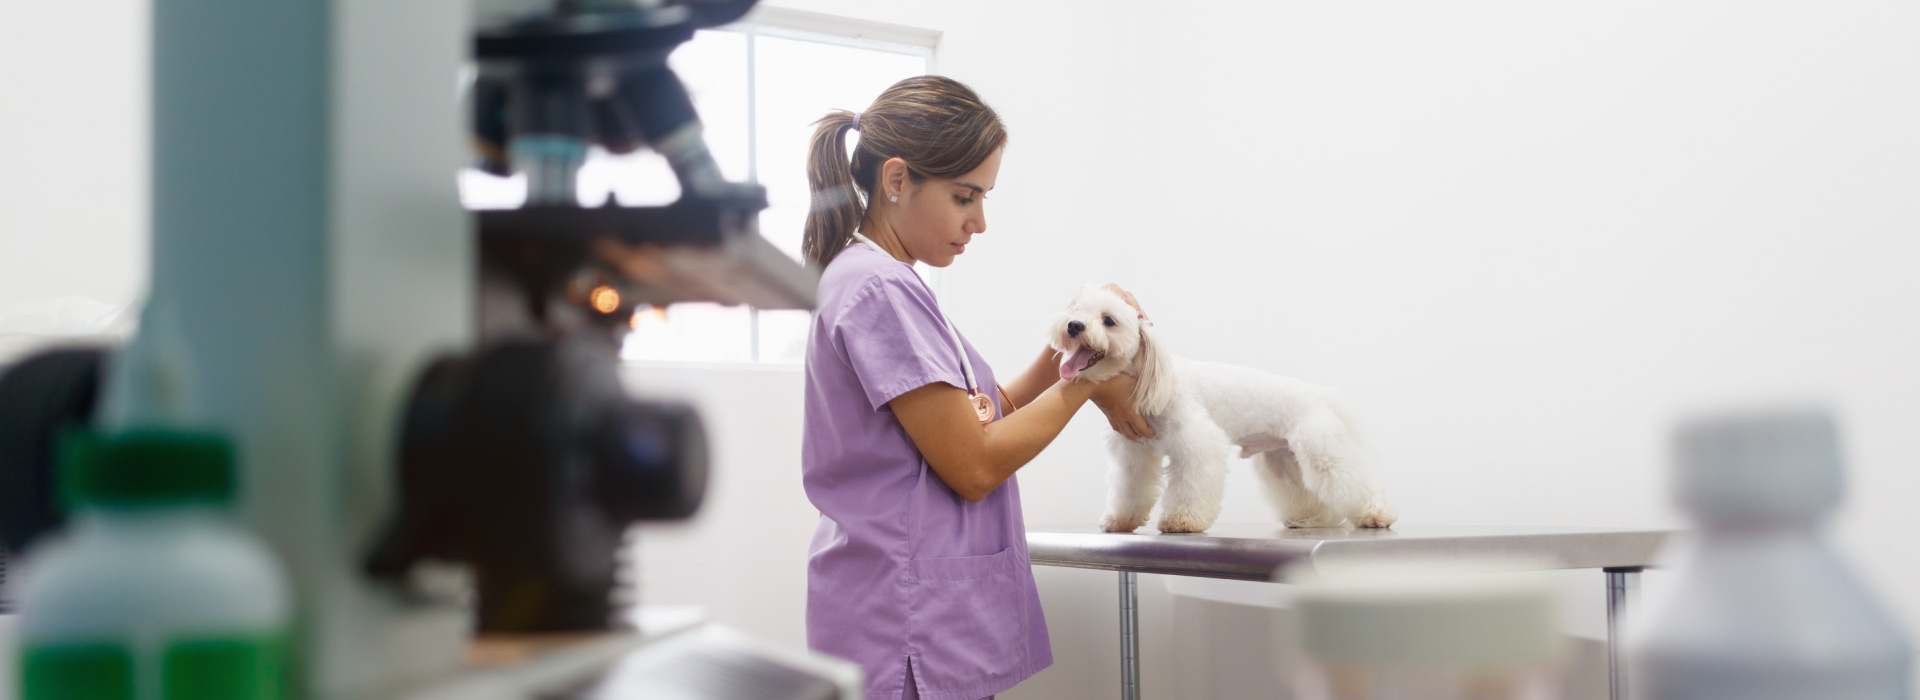 Veterinary nurse with dog in clinic room